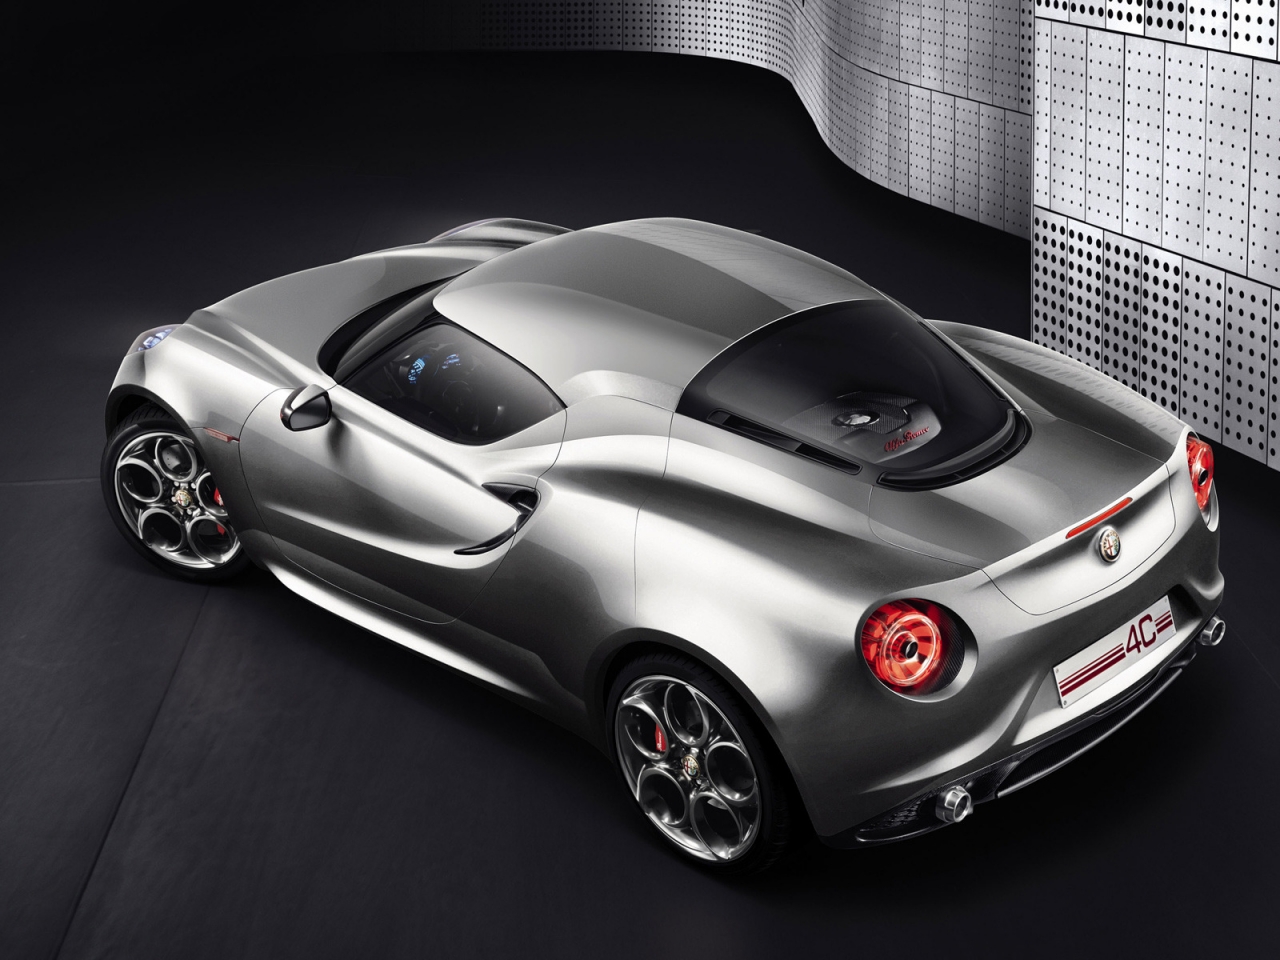 Alfa 4c Concept Rear Top View for 1280 x 960 resolution